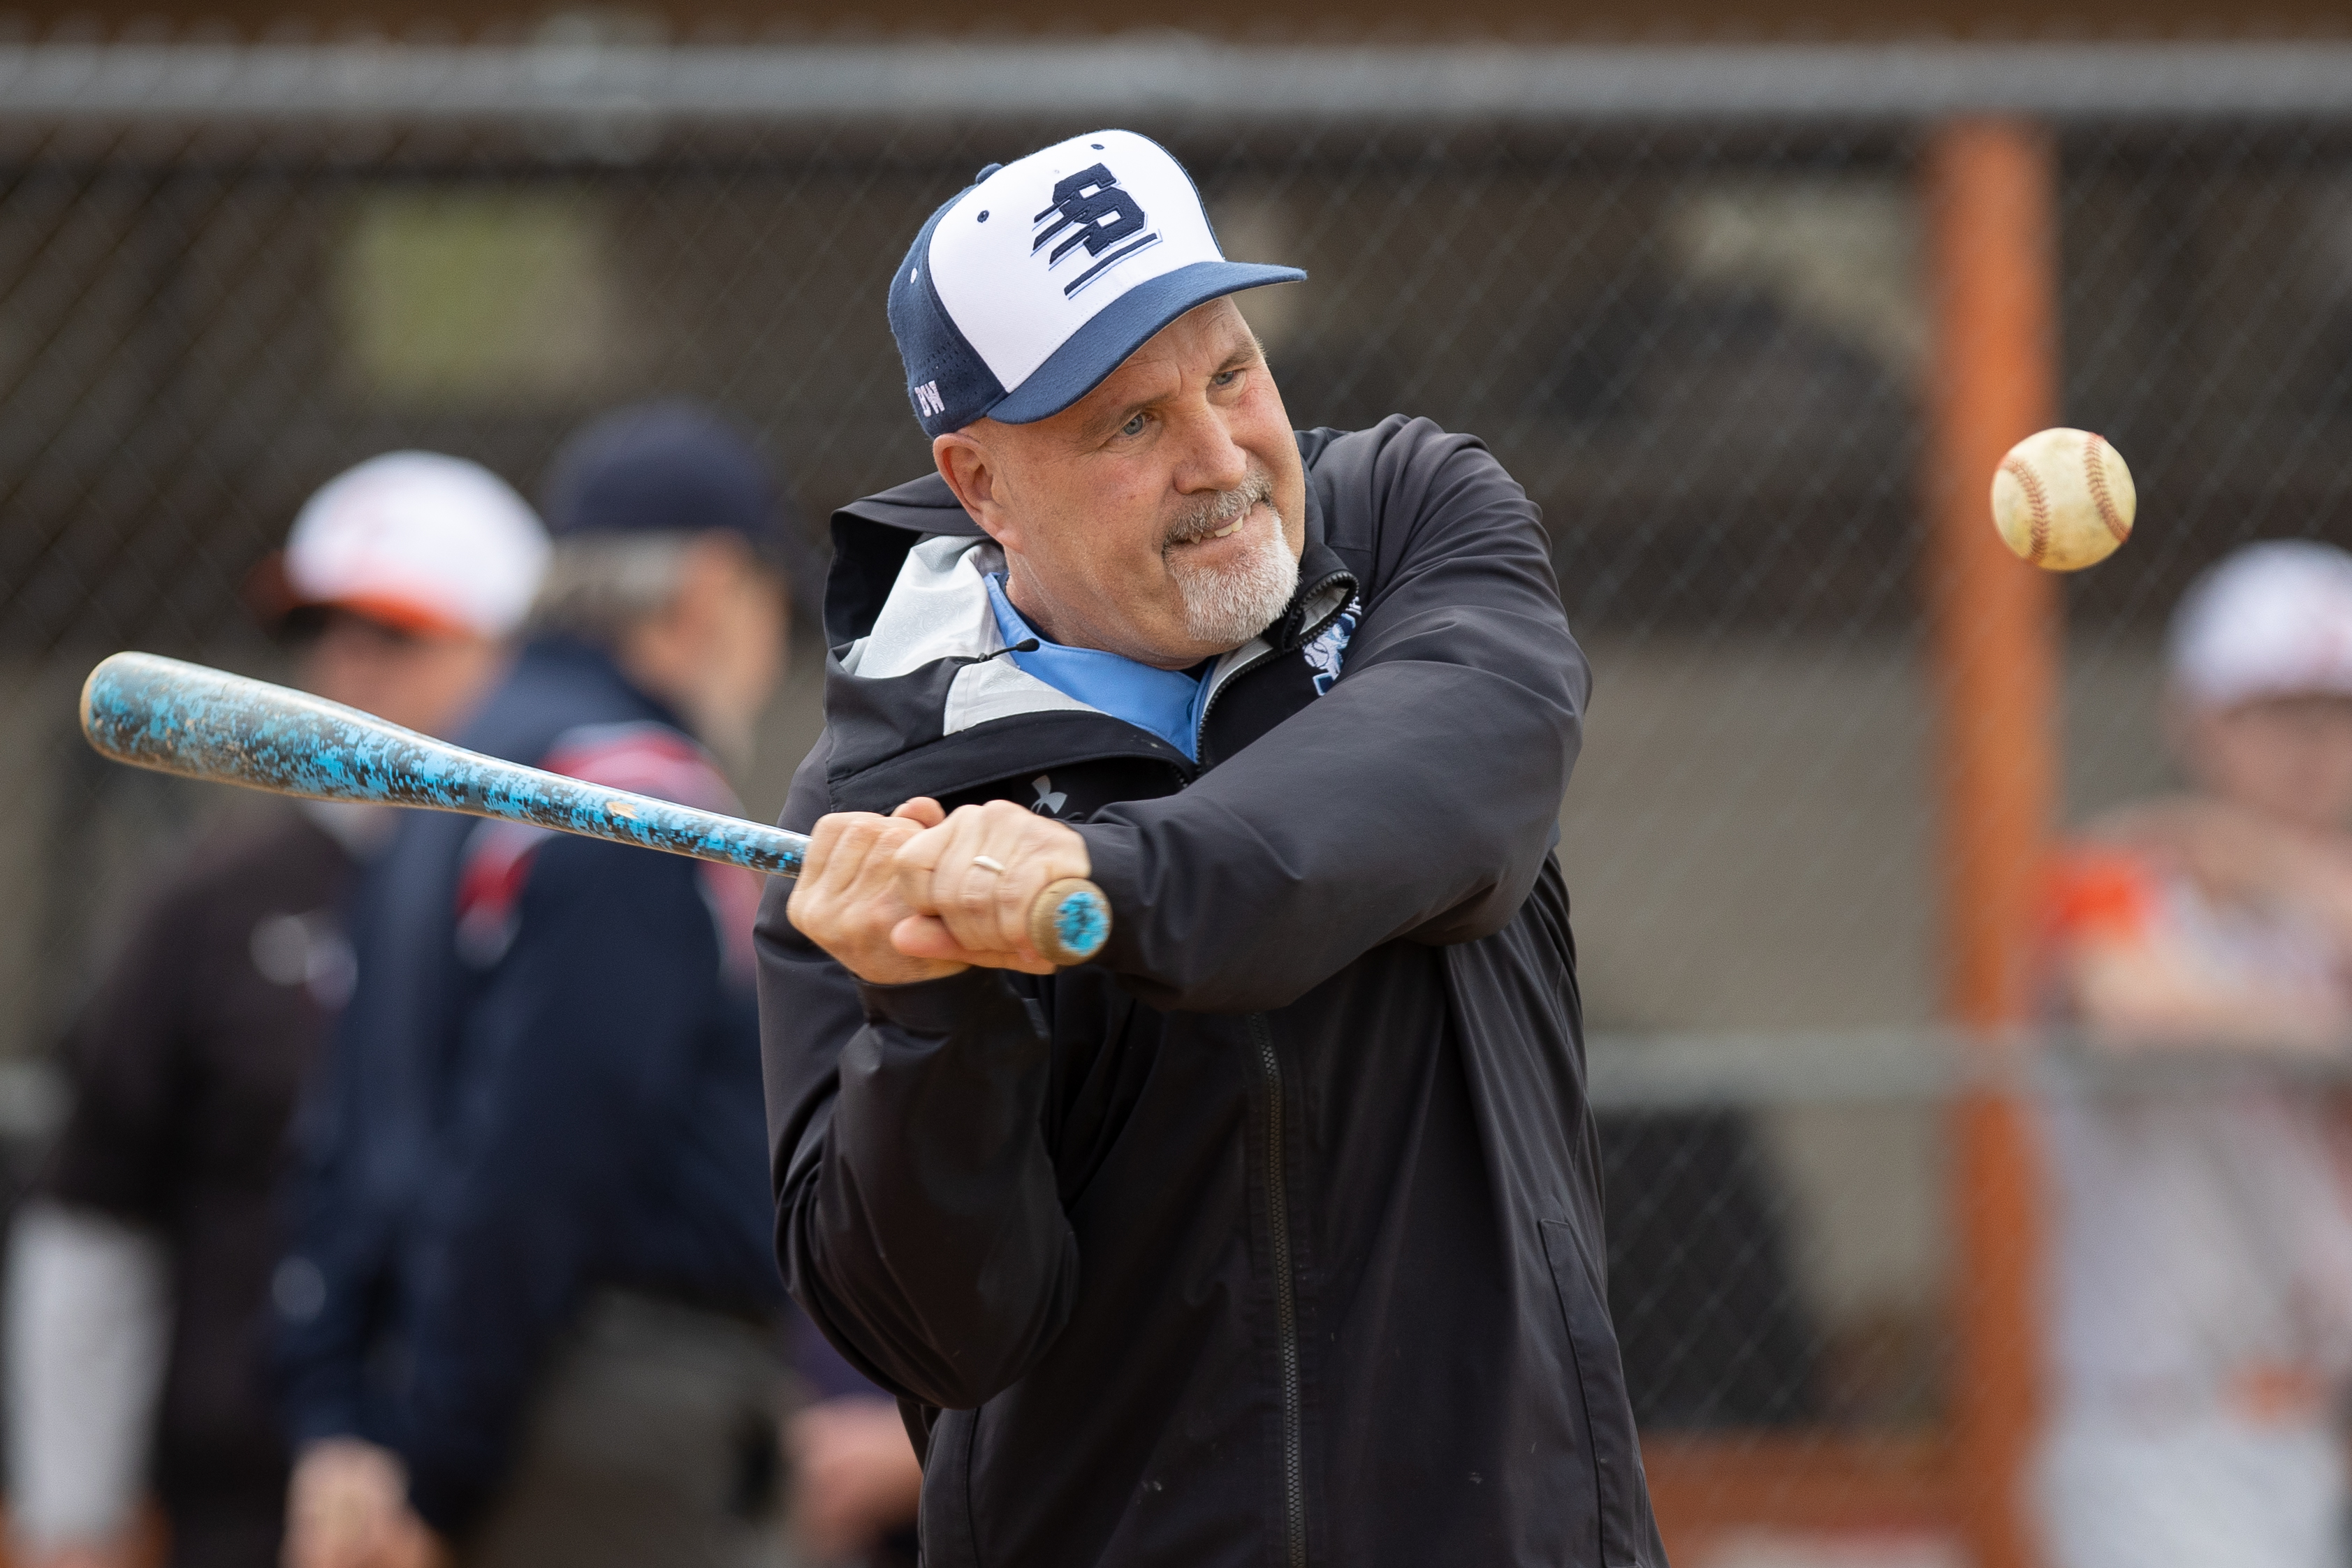 Head Coach Brian Anderson, of Shawnee, hits to players for warm ups in Marlton, NJ on Monday, April 3, 2023.